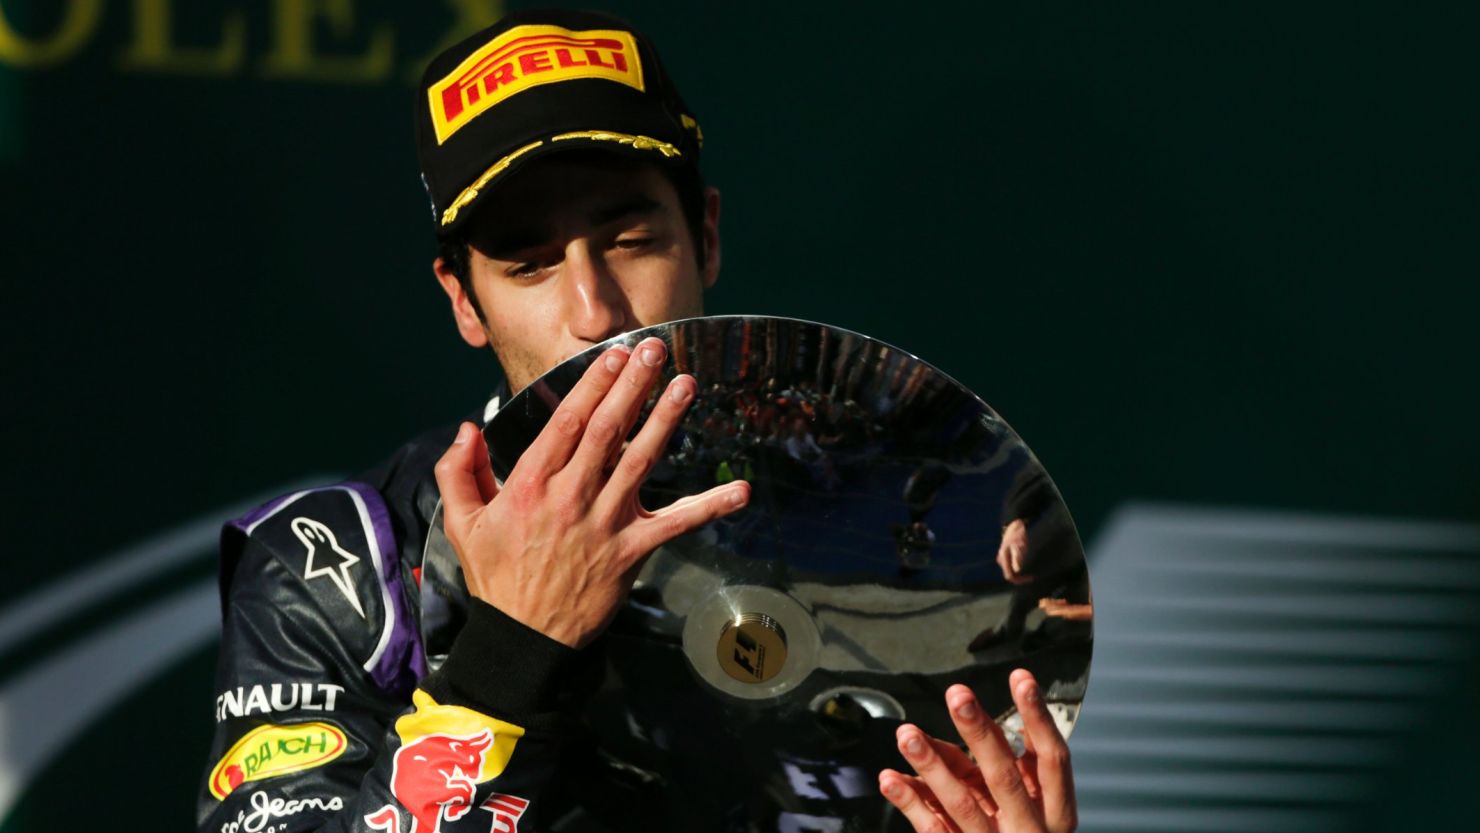 Australian Daniel Ricciardo briefly celebrated on the podium at his home grand prix, before learning he had been disqualified.